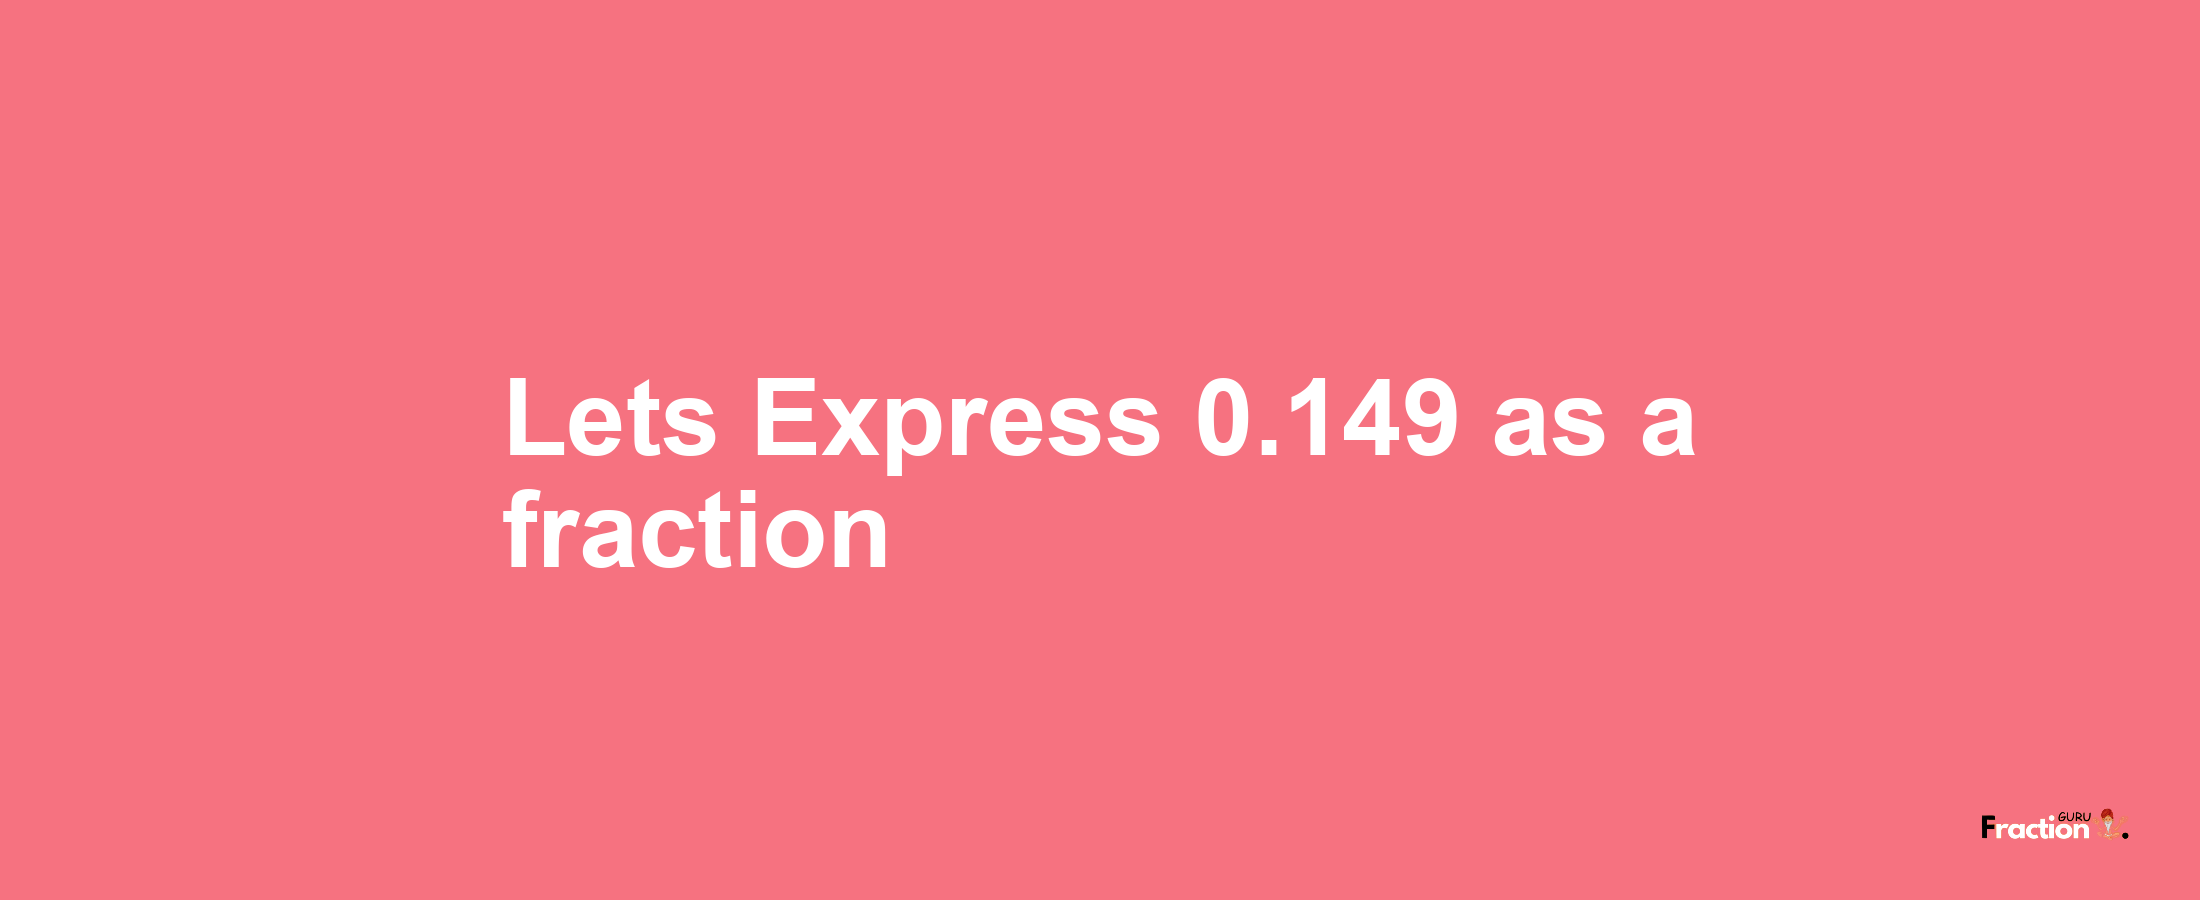 Lets Express 0.149 as afraction